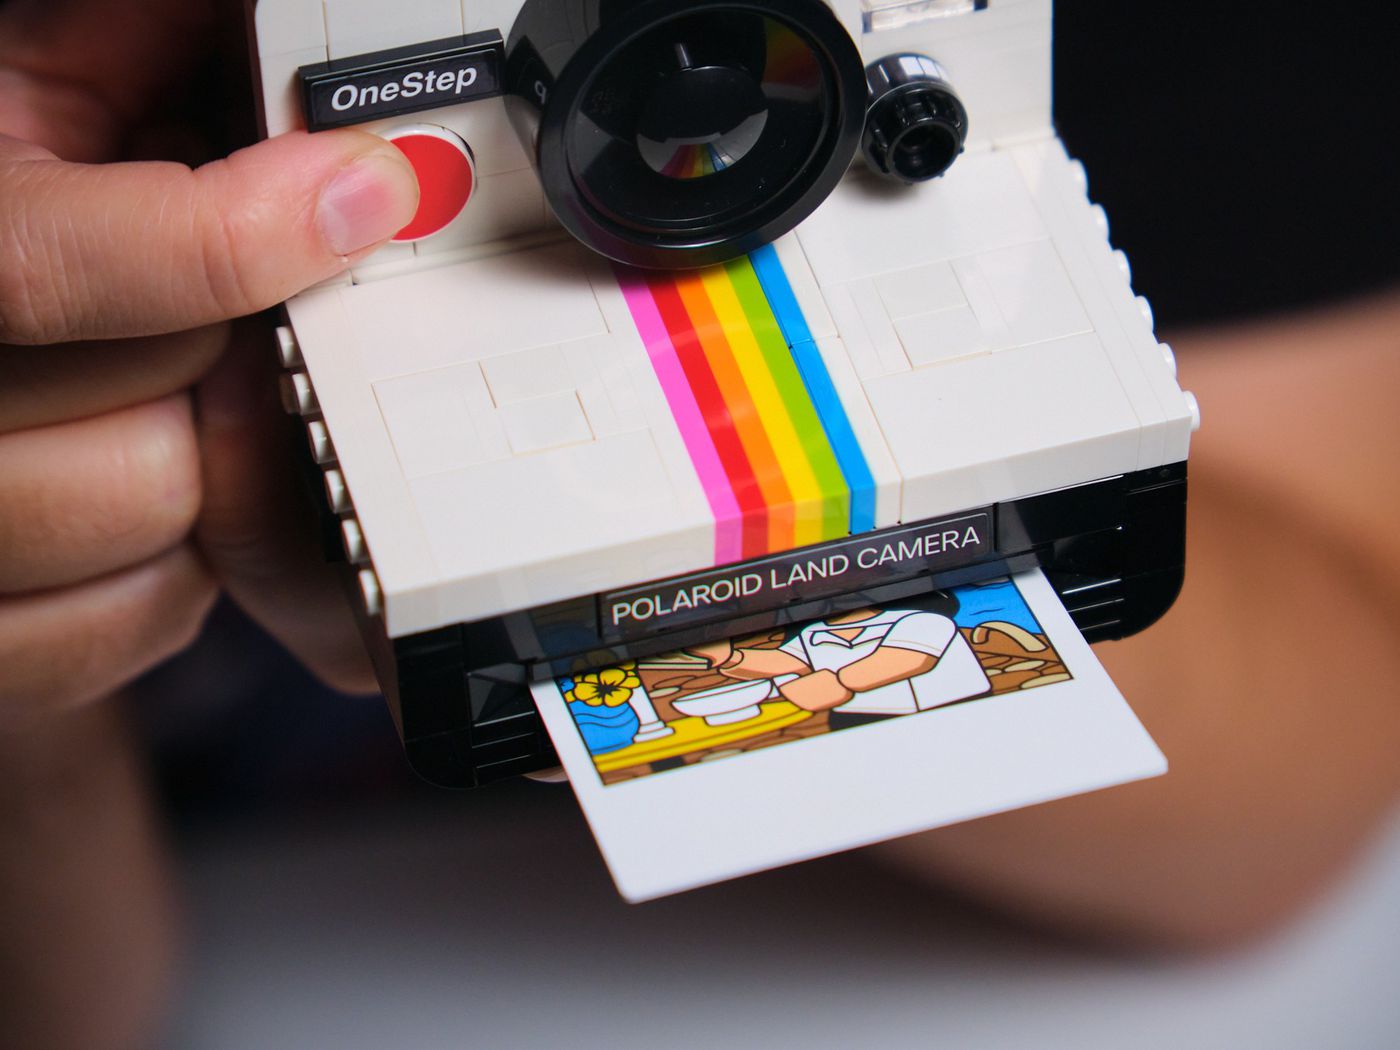 The result: when you press the shutter button, the Lego Polaroid shoots a photo out of its slot.